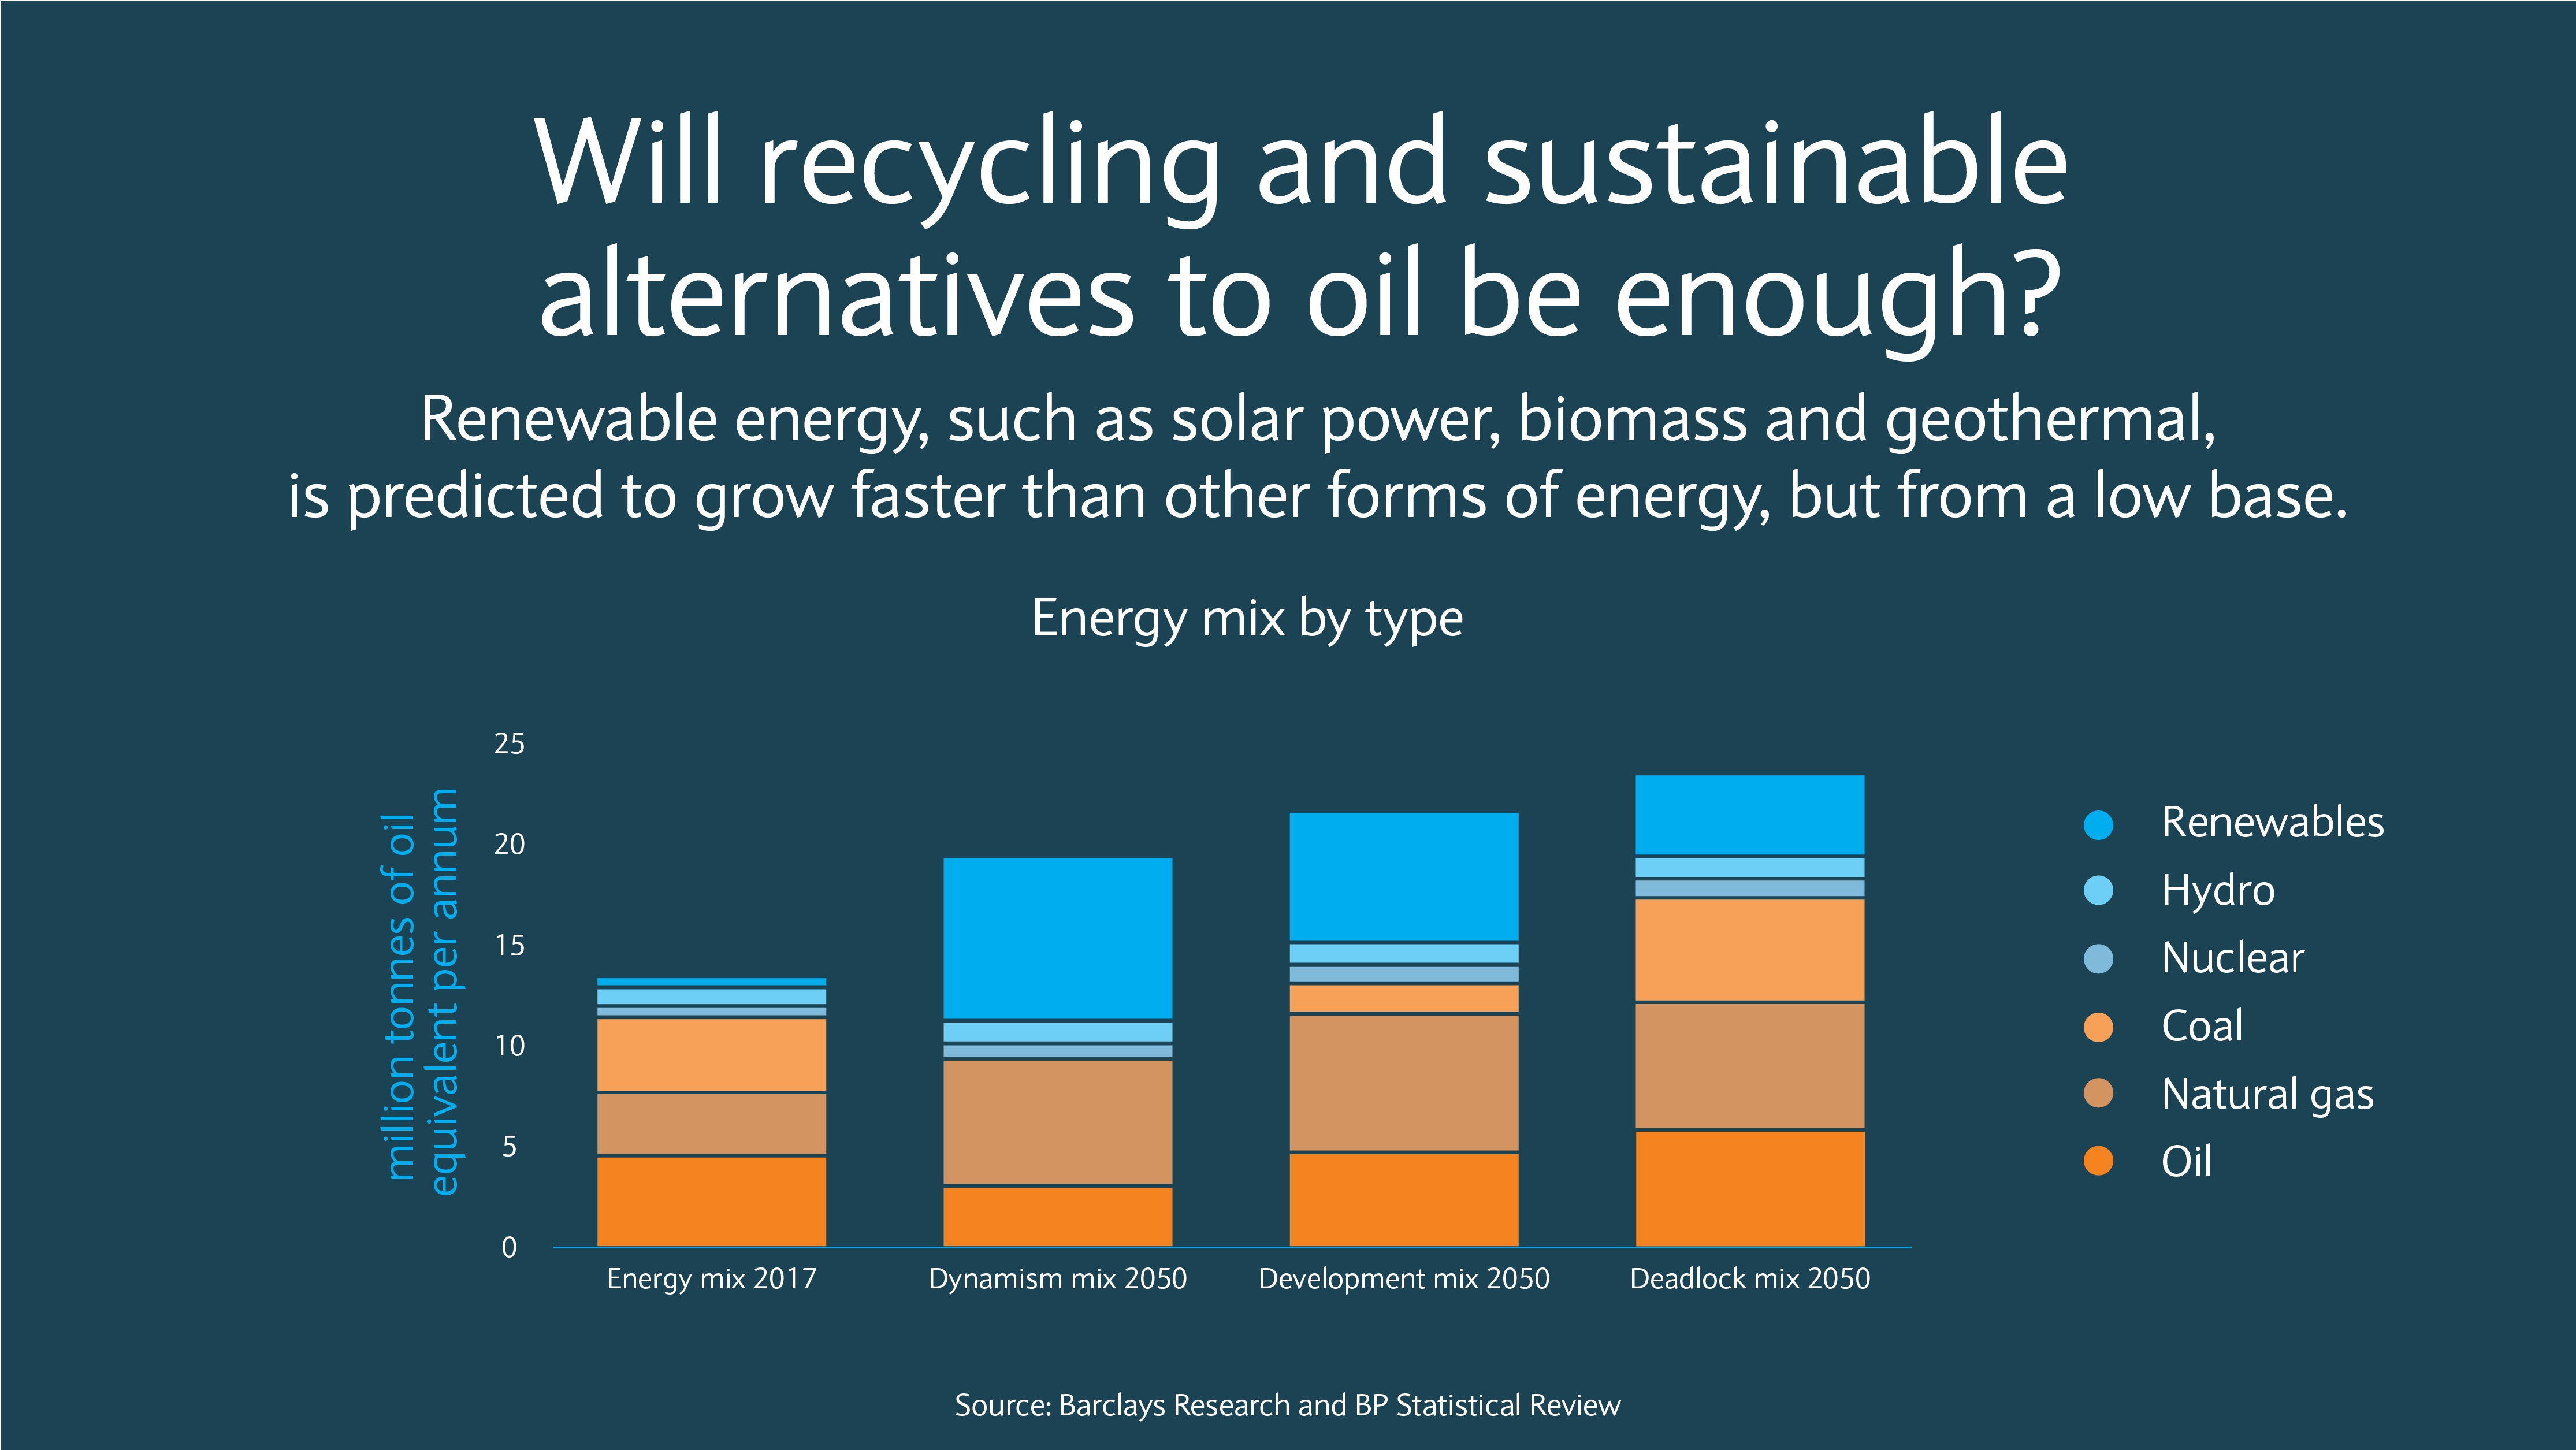 Will recycling and sustainable alternatives to oil be enough?